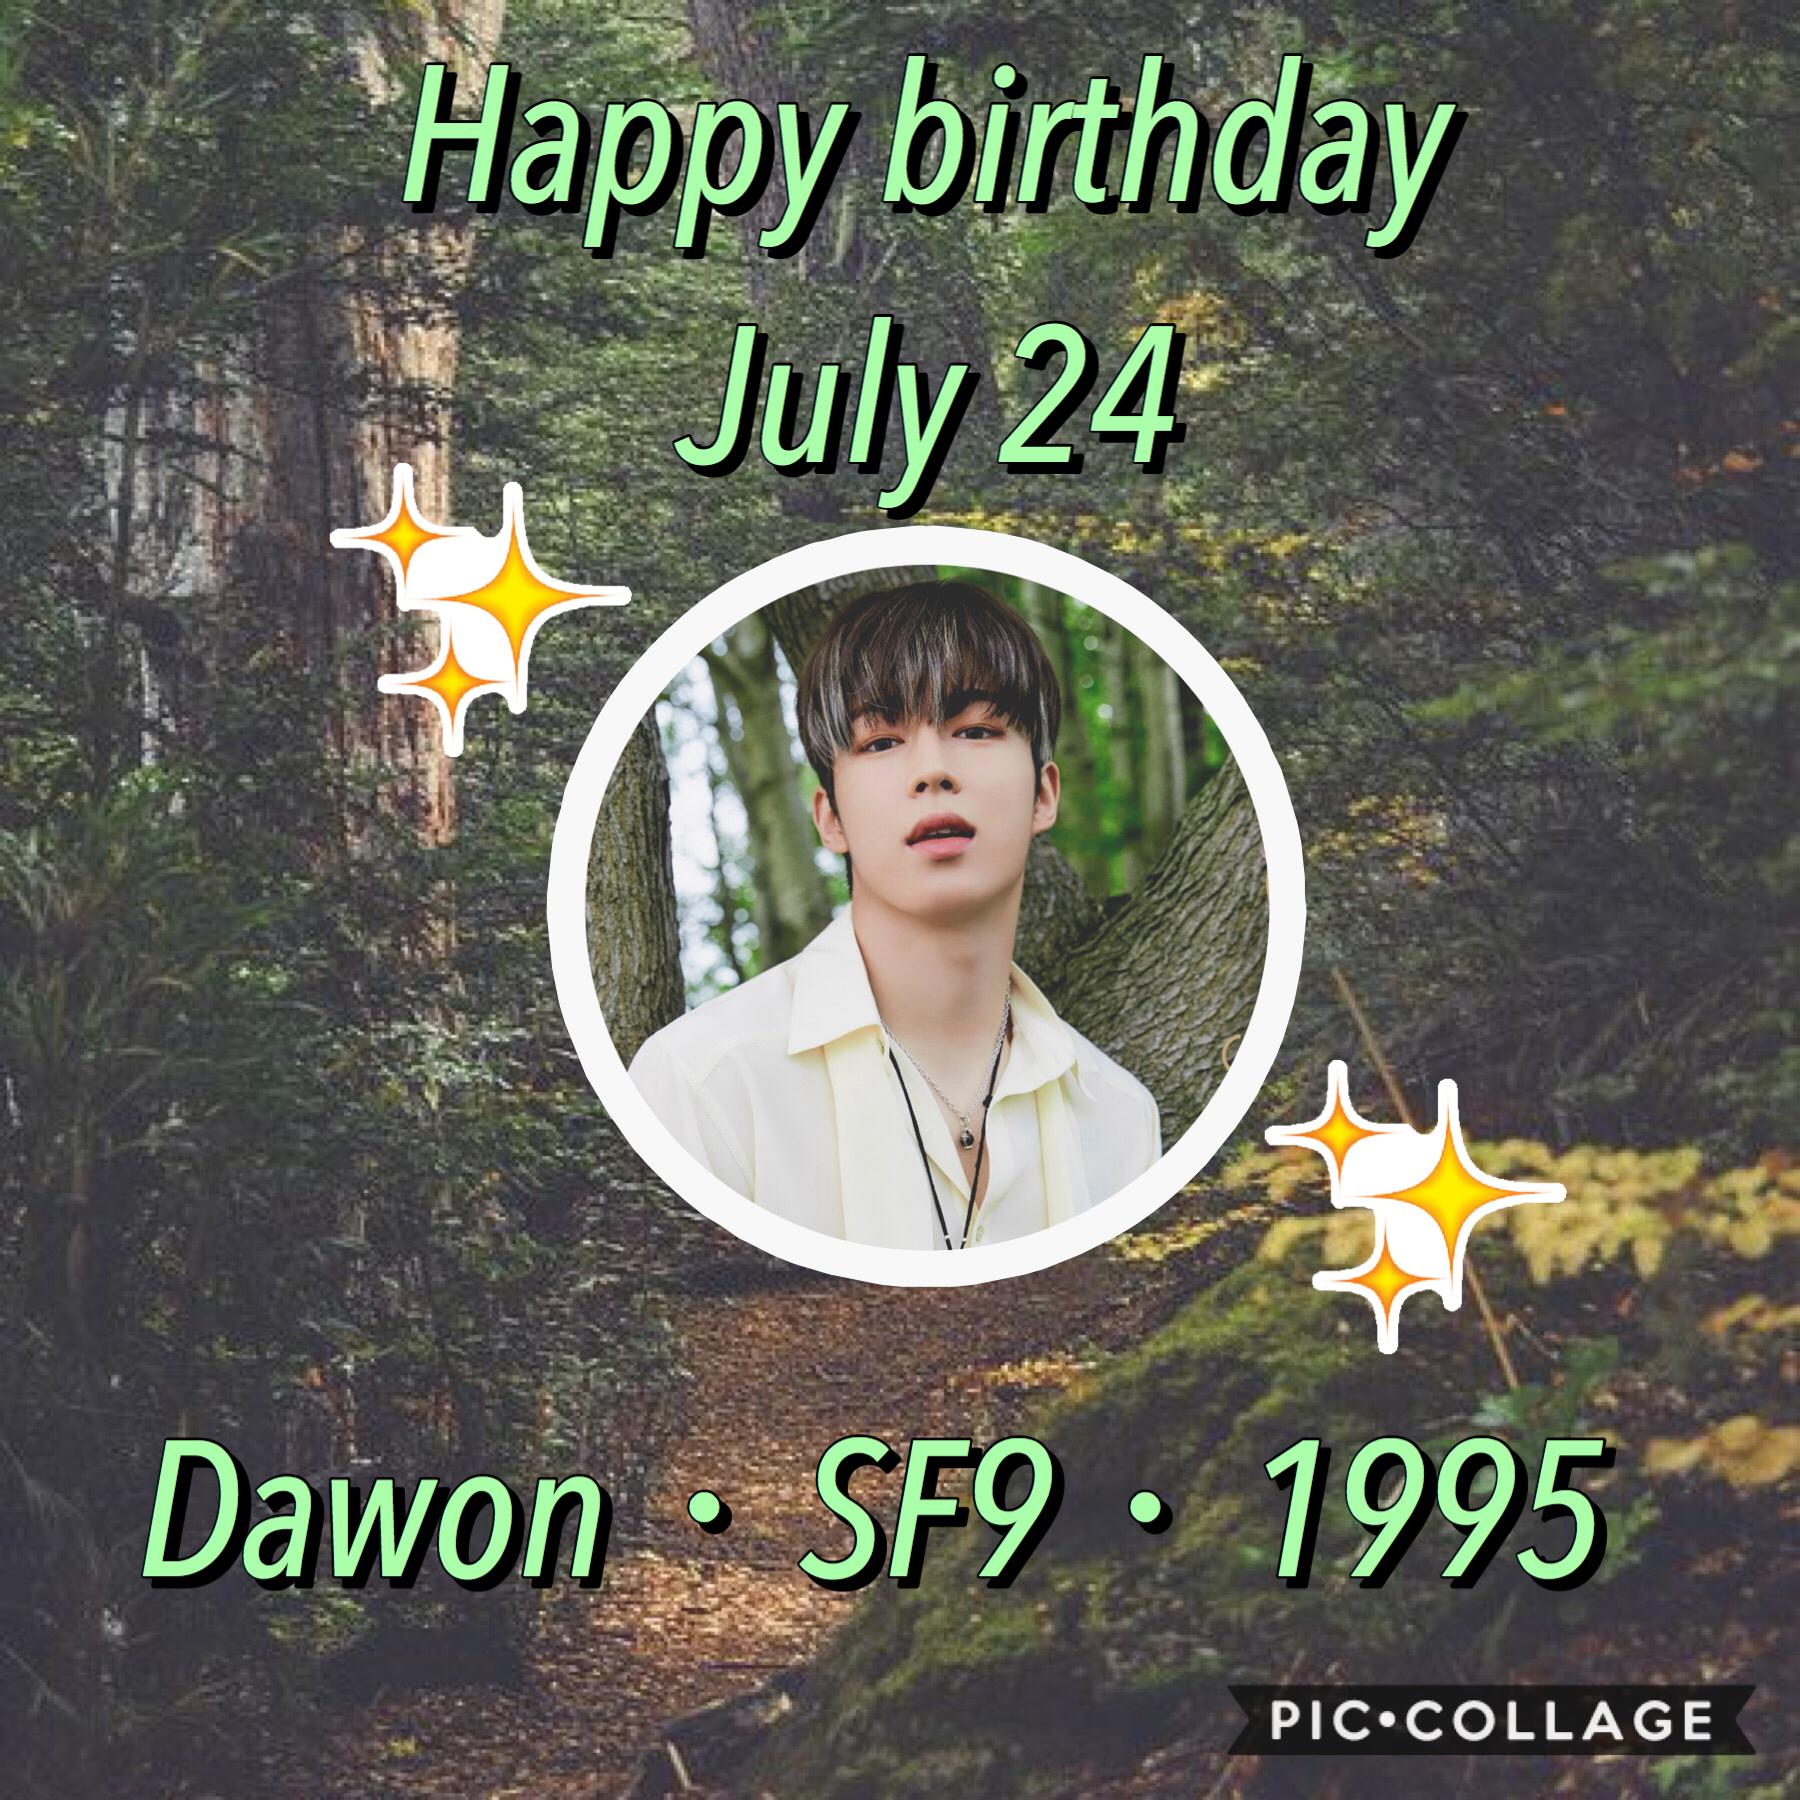 •🌻🍃•
Happy birthday to another SF9 boy! Dawon is such a goofball haha🥺❤️
Other birthdays:
•ONEUS’s Leedo~ July 26
🌻🍃~Whoop~🍃🌻